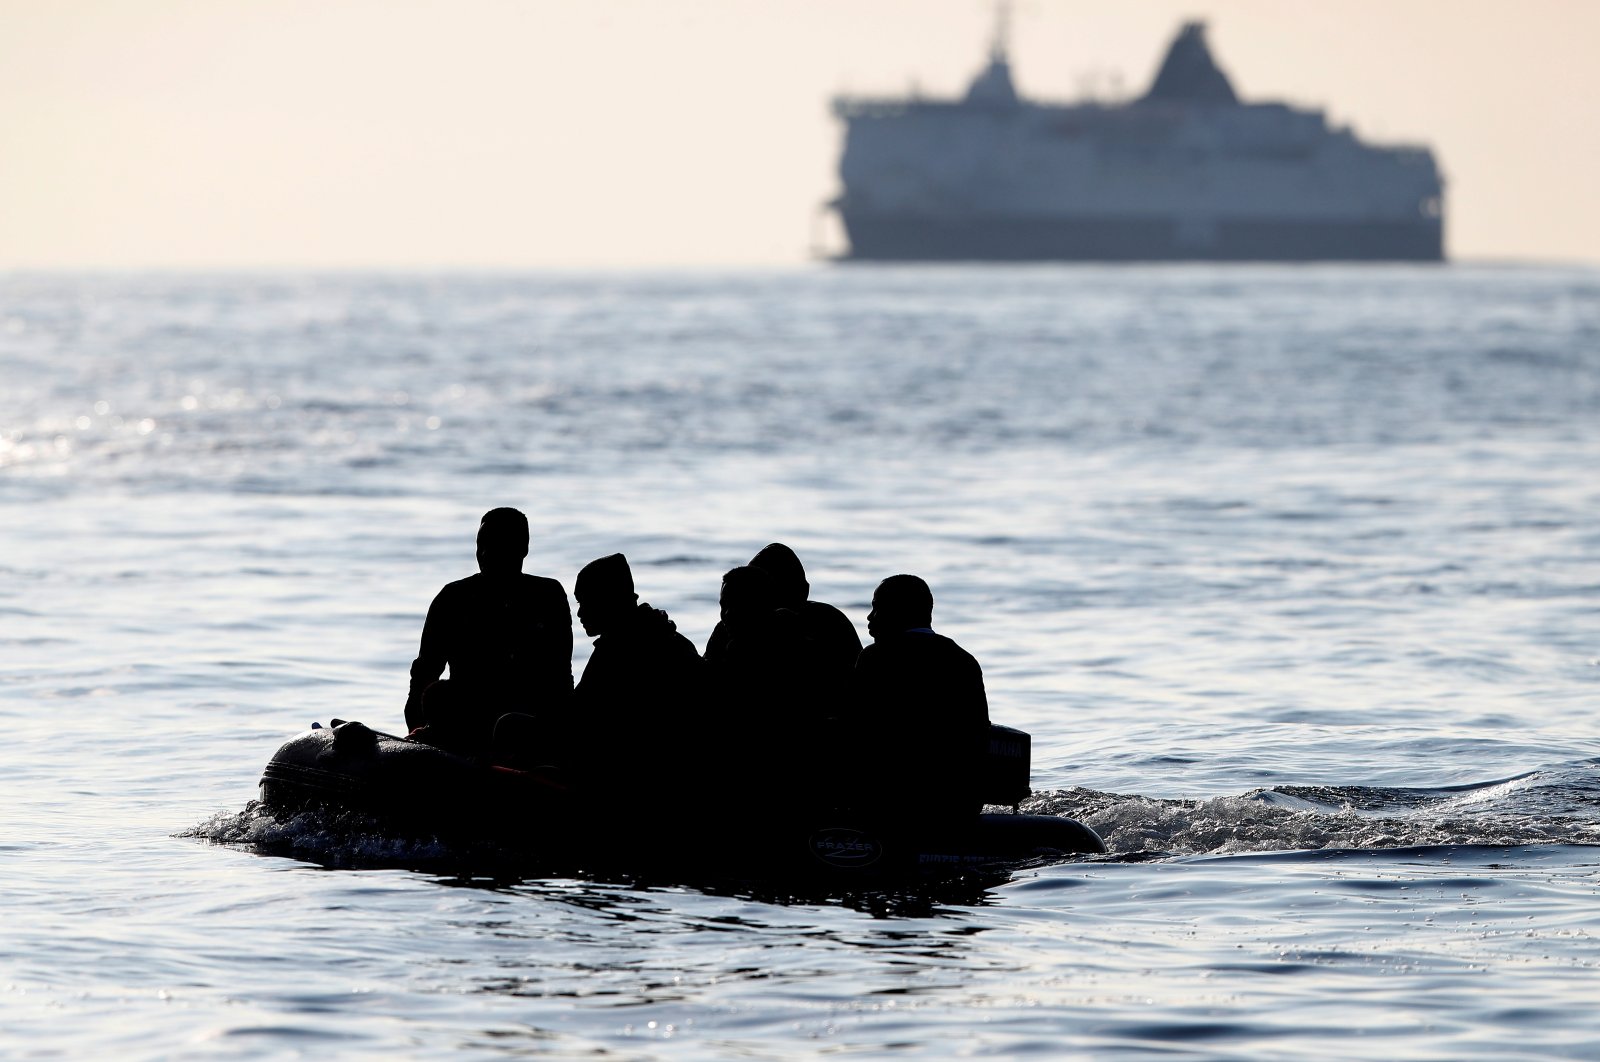 People who say they are from Darfur, Sudan cross the English Channel in an inflatable boat near Dover, Britain, Aug. 4, 2021. (REUTERS Photo)